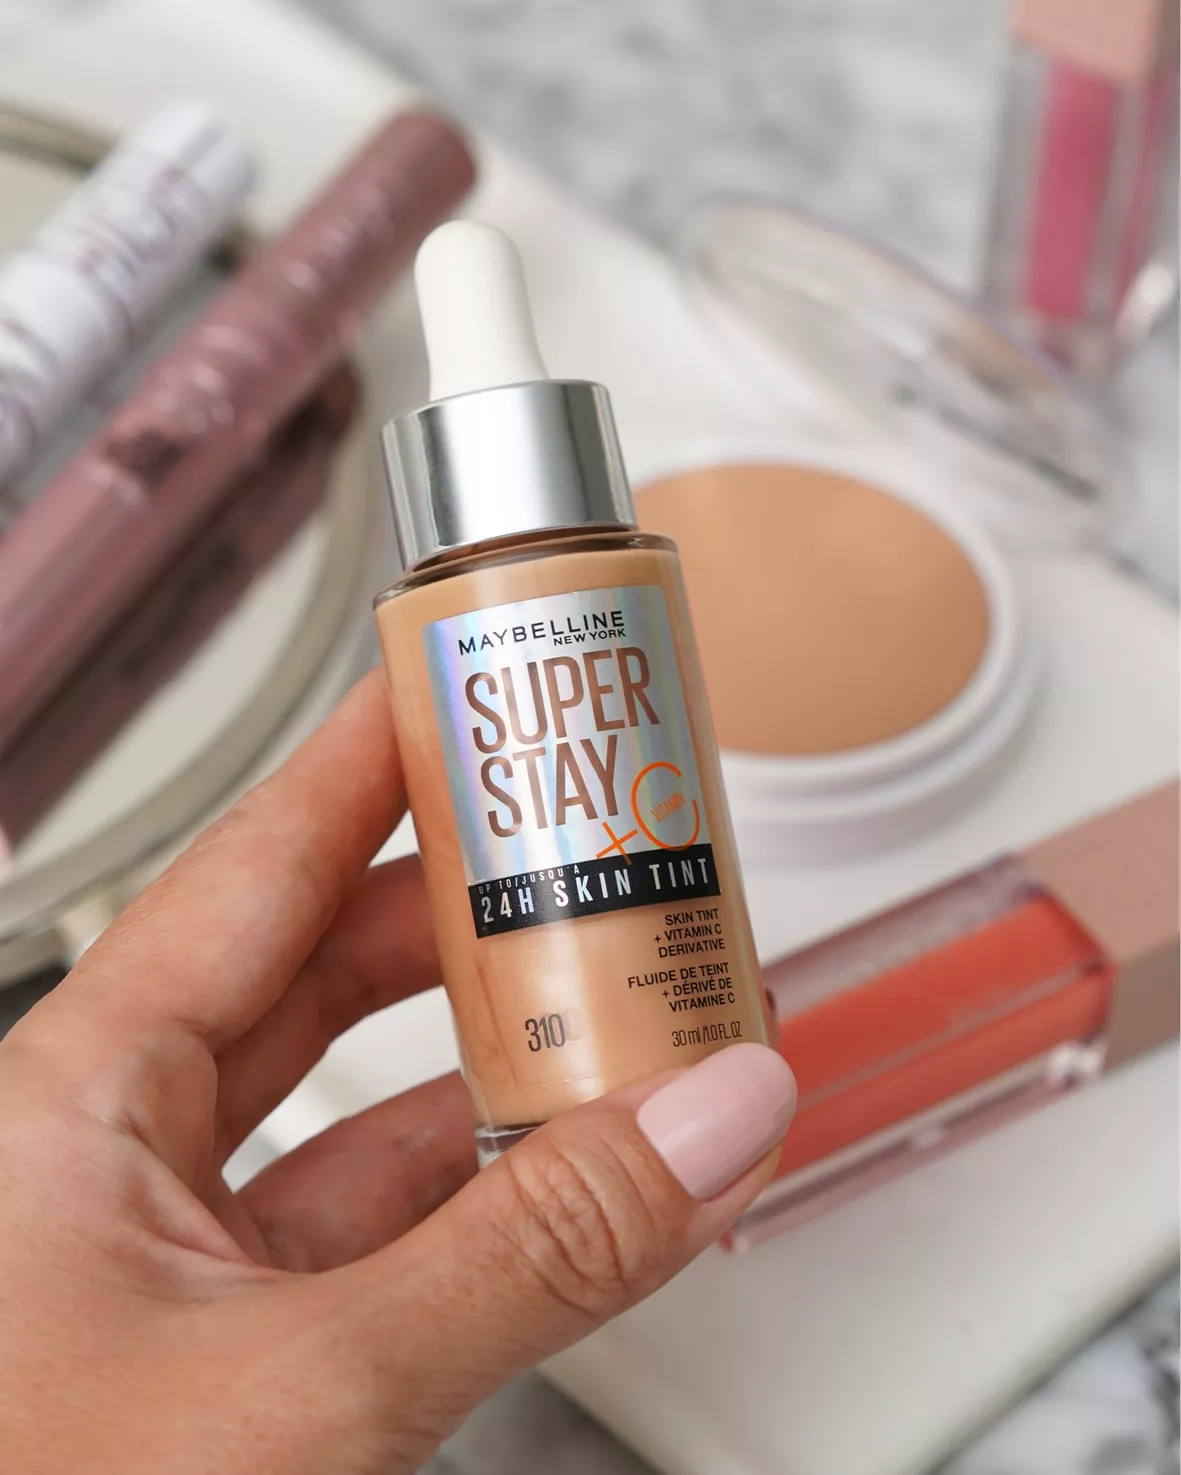 Maybelline Super Stay Long Lasting up to 24H Skin Tint Foundation+Vitamin C  ()